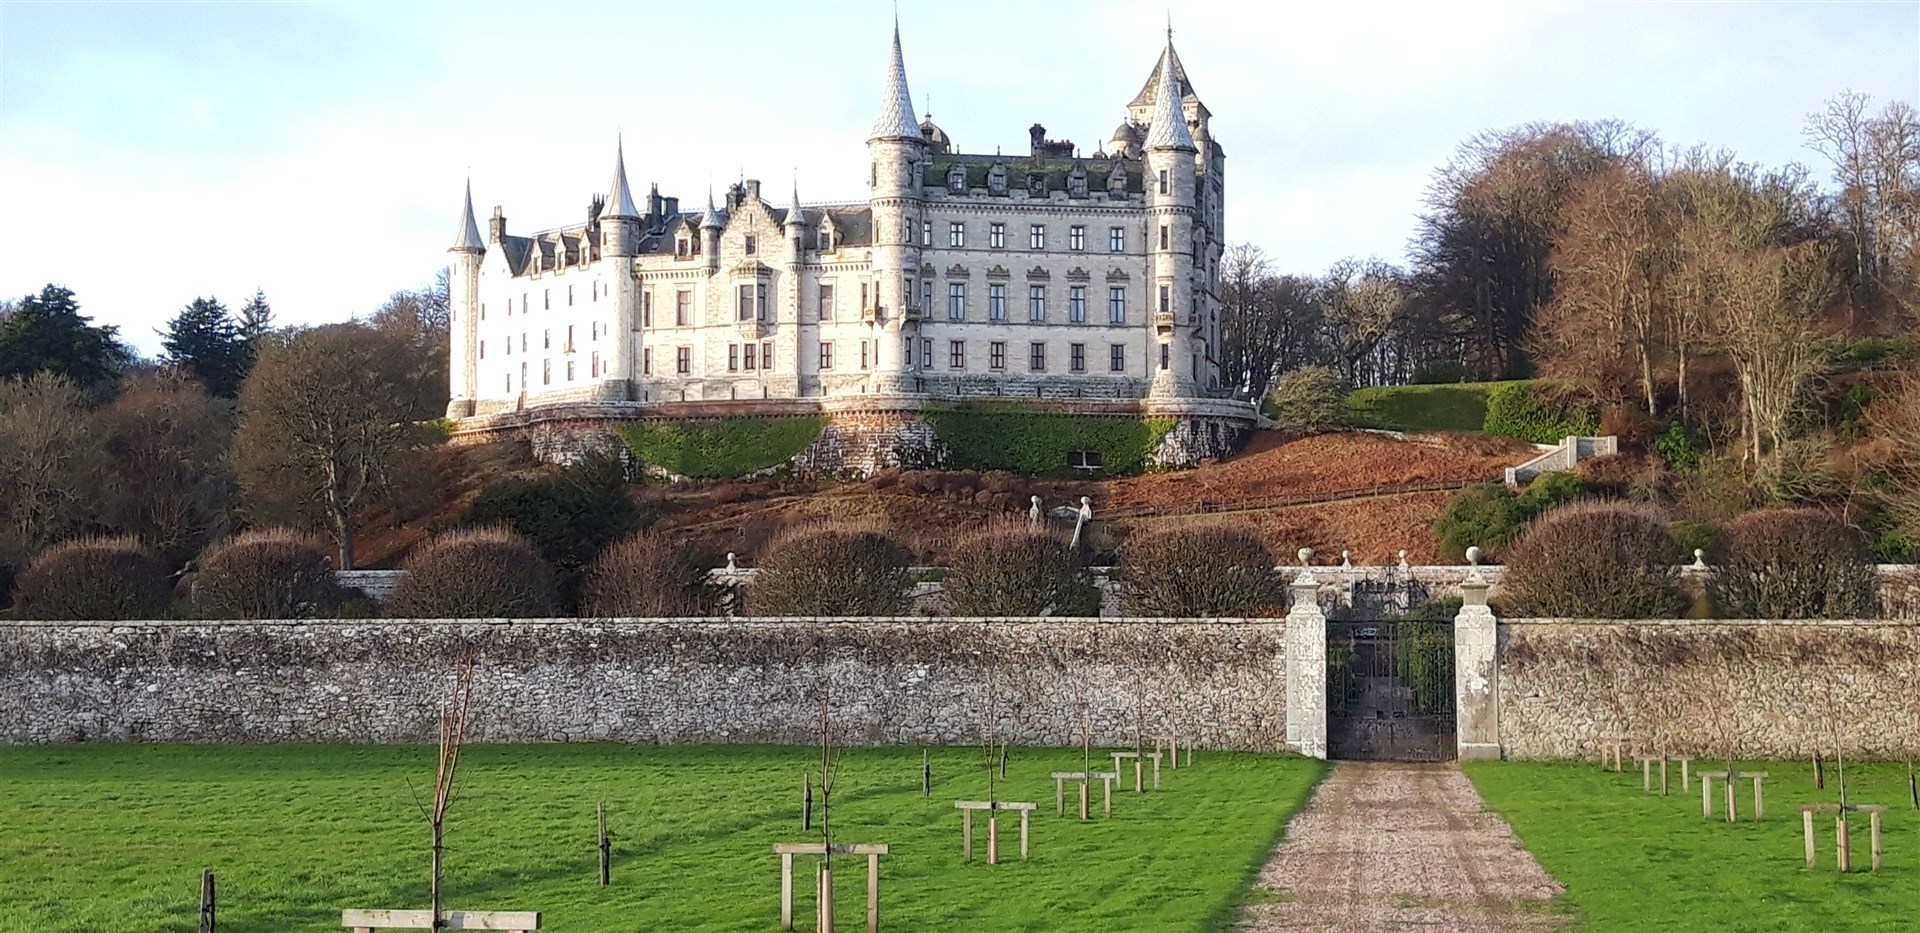 The gardens at Dunrobin Castle are the venue for a summer Platinum Jubilee party planned by East Sutherland Rotary.